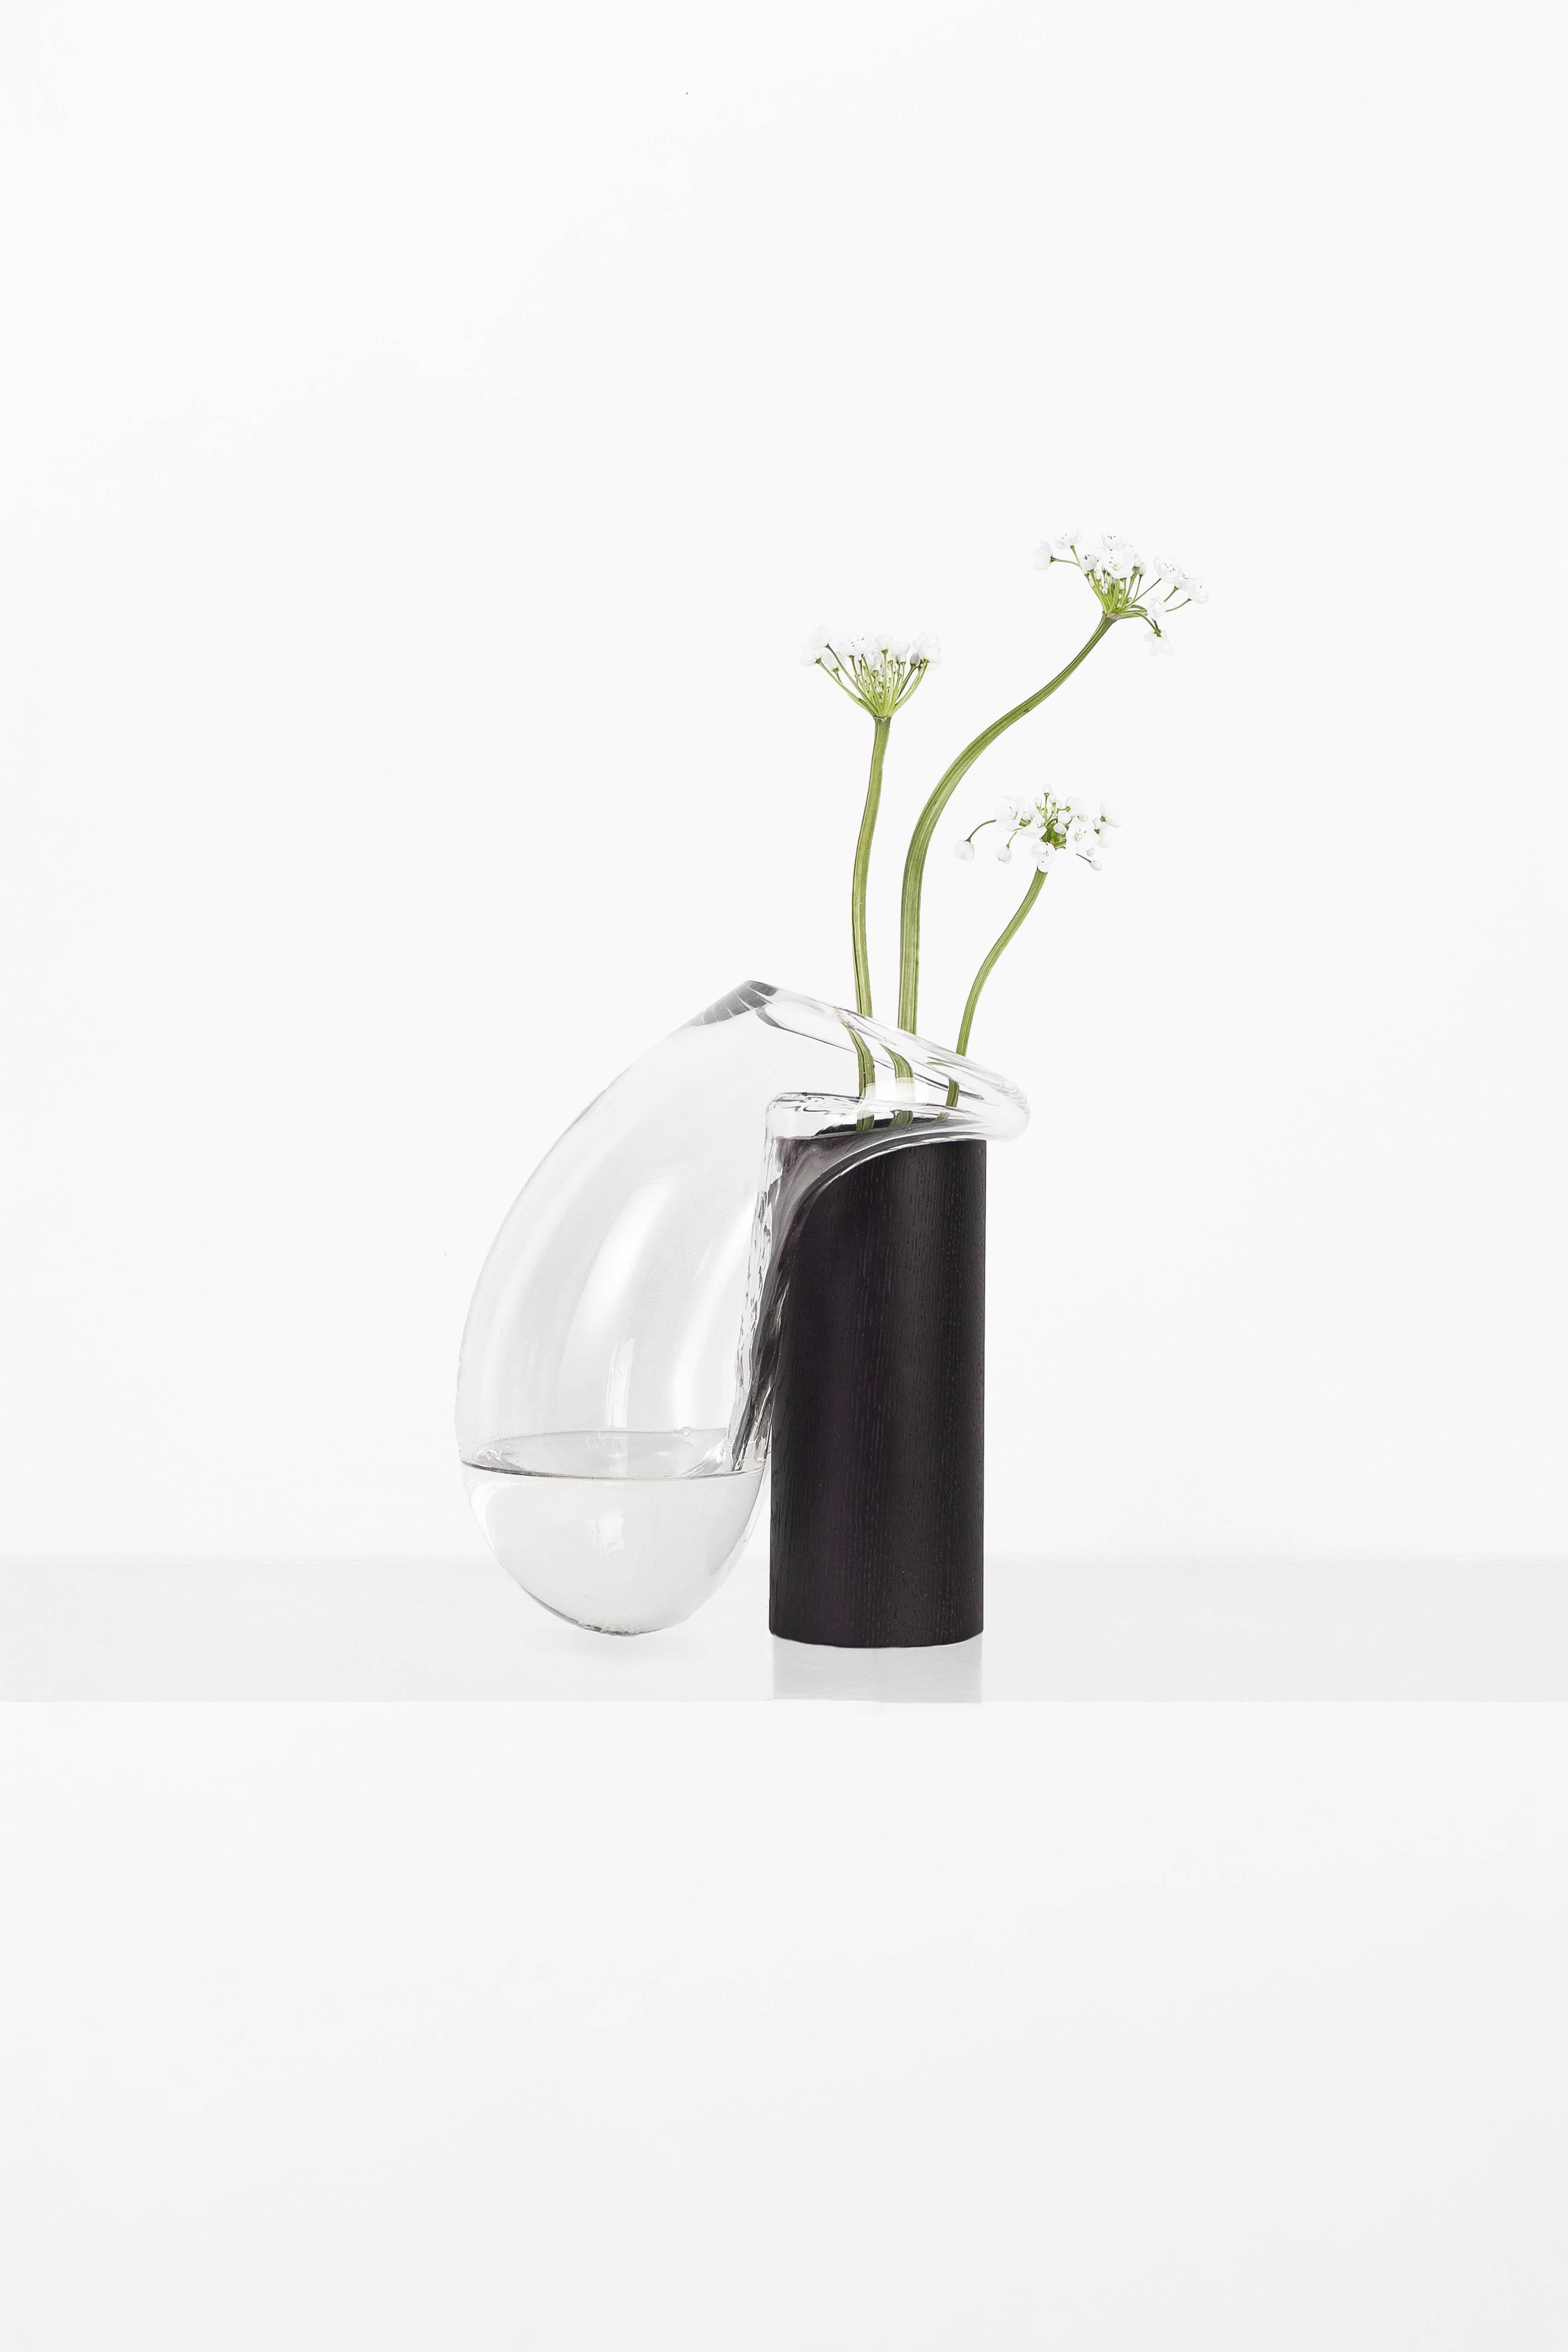 Ukrainian Contemporary Vase 'Gutta Boon CS1' by Noom, Large, Blown Glass and Oak Base For Sale